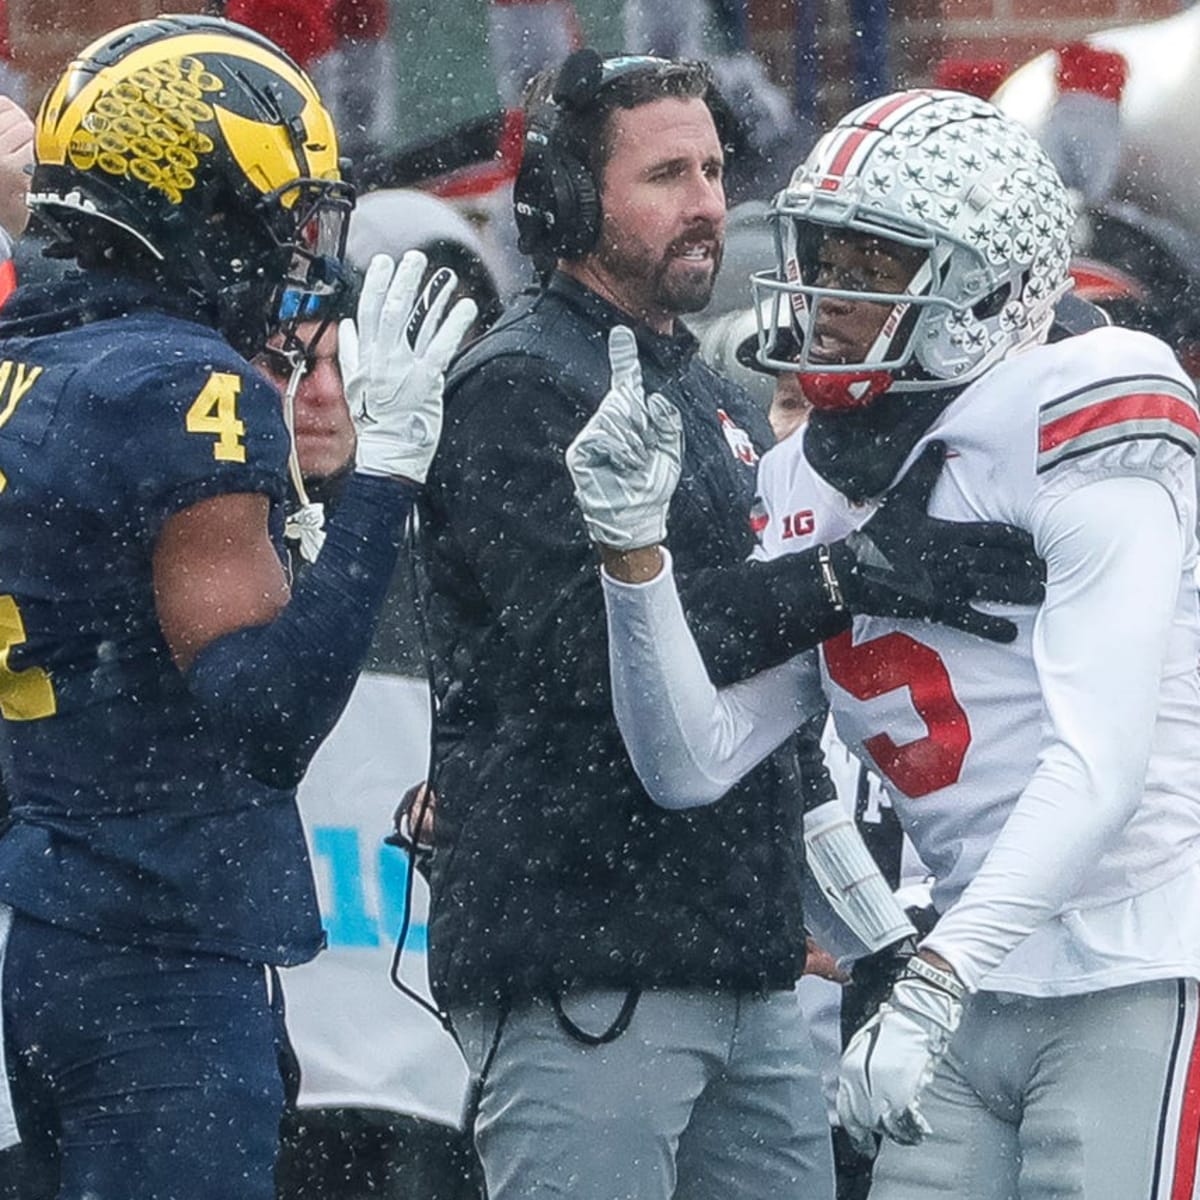 Michigan basketball's controversial loss to Ohio State 'hurts a lot